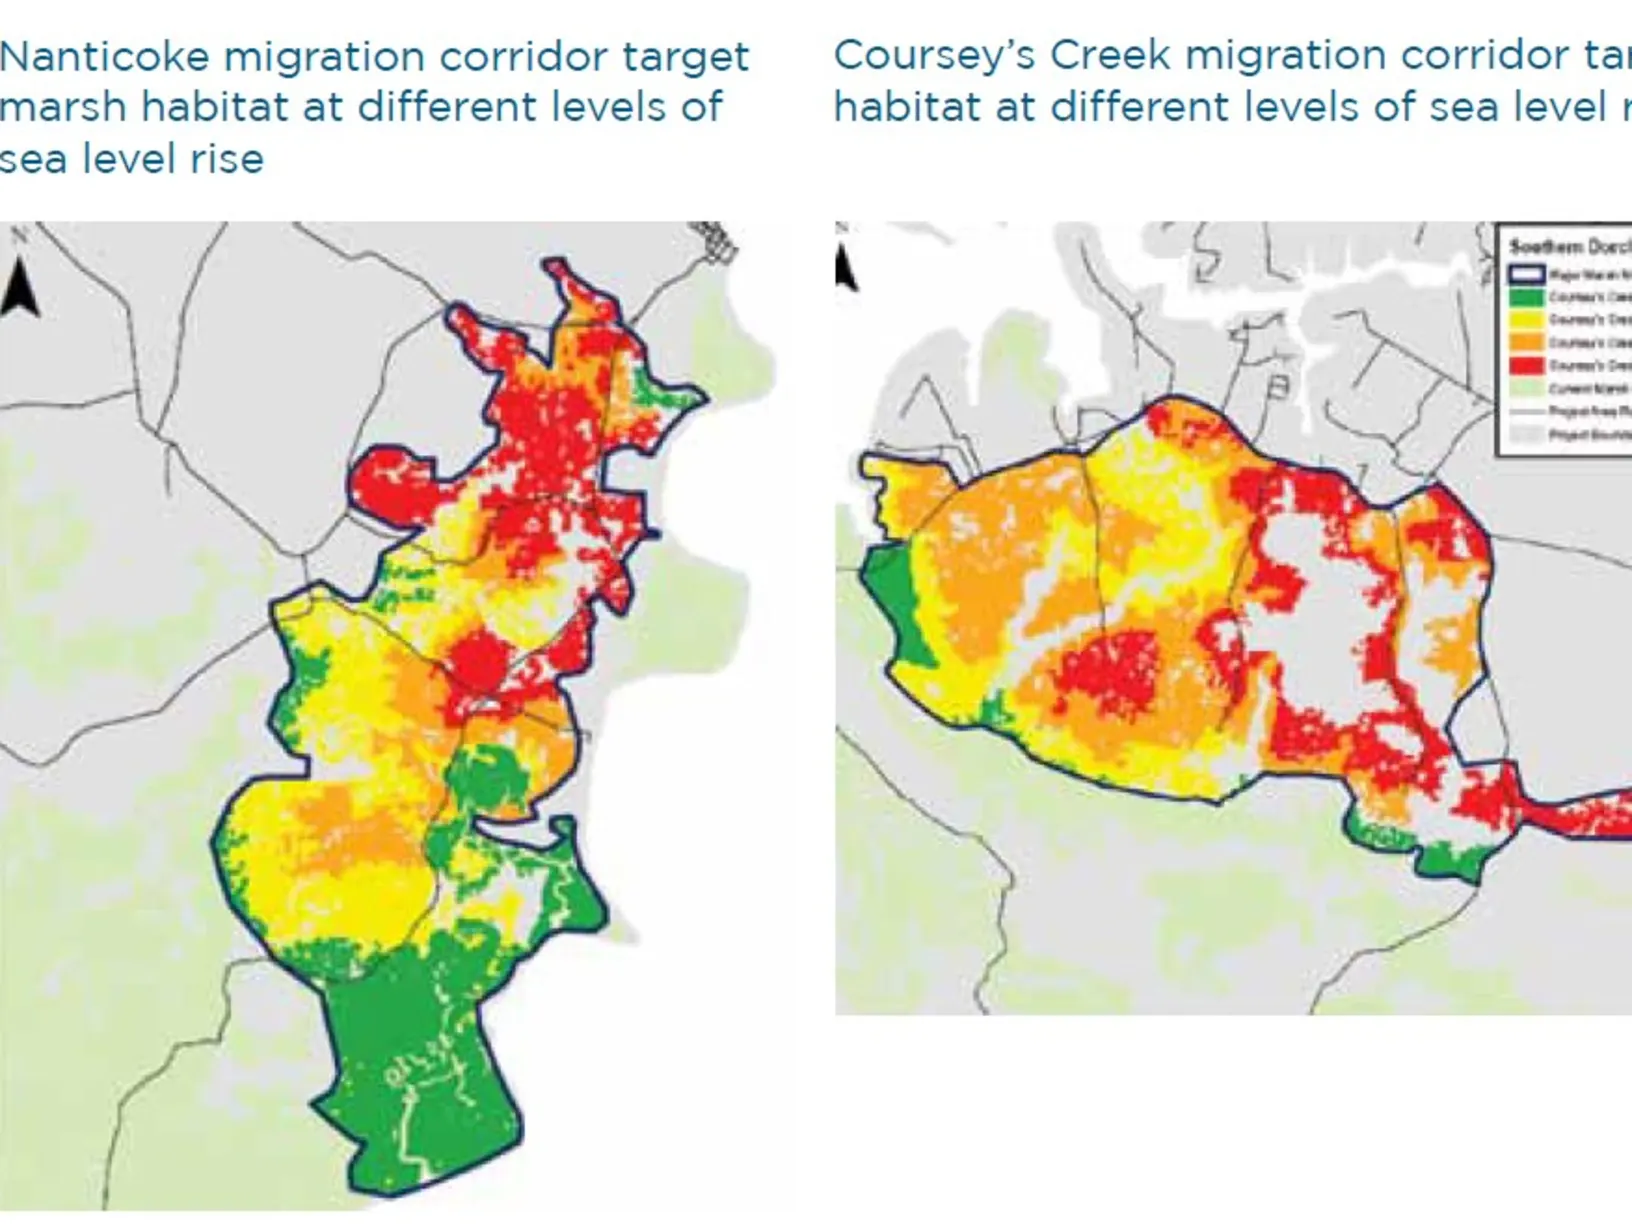 Two maps side by side, one that has the header "Naticoke migration corridor target marsh habitat at different levels of sea rise." The second has the header "Coursey's Creek migration corridor target marsh habitat at different levels of sea level rise."